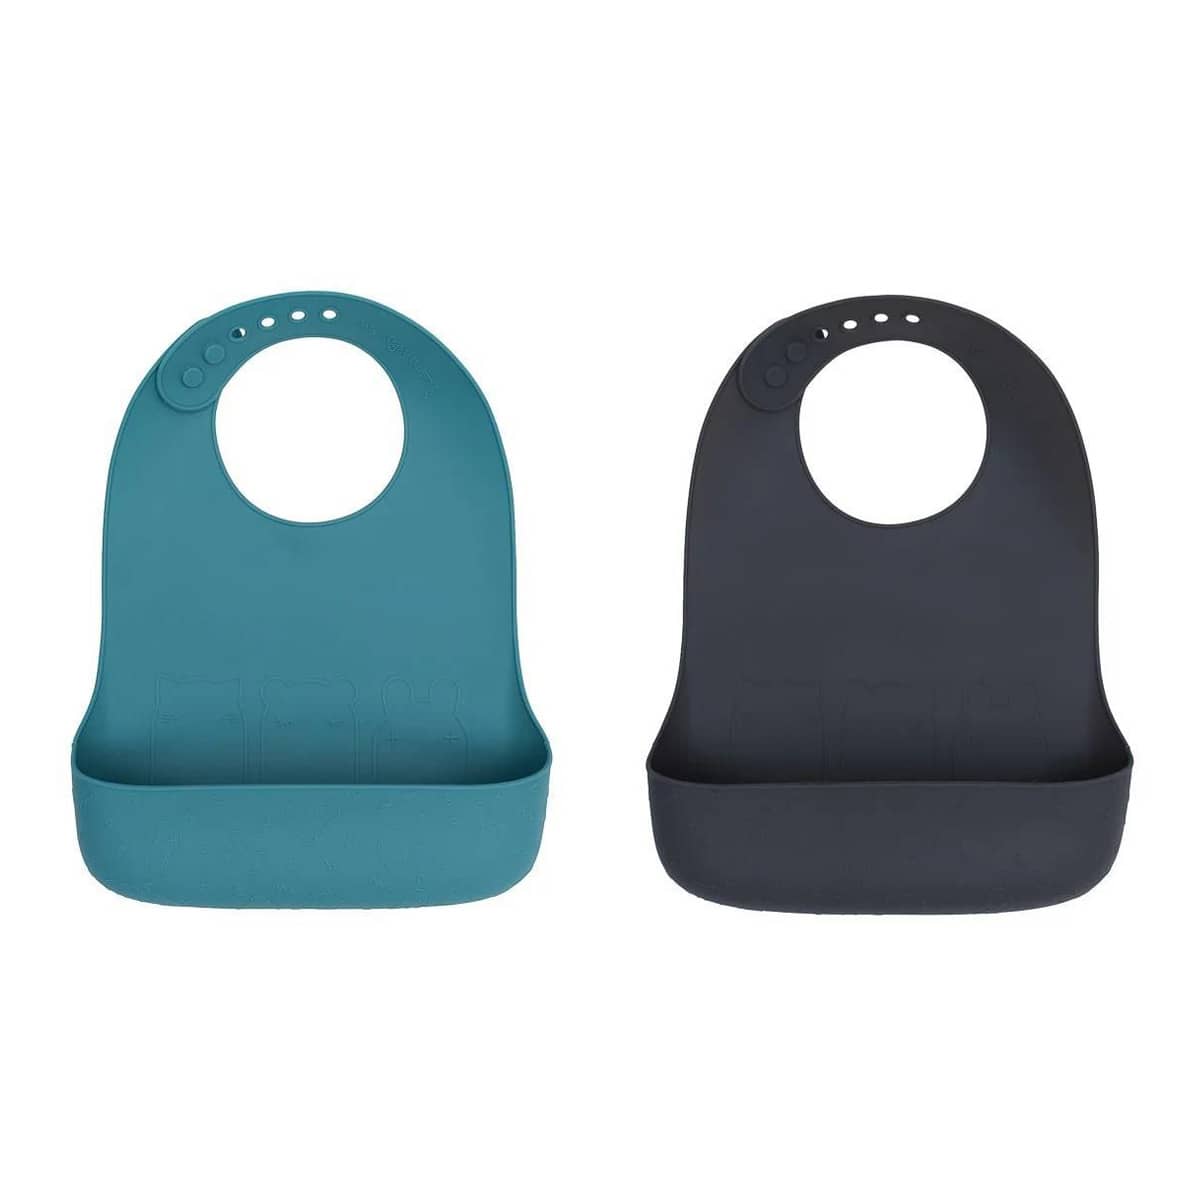 We Might Be Tiny Silicone Catchie Bibs 2.0 - Blue Dusk/Charcoal